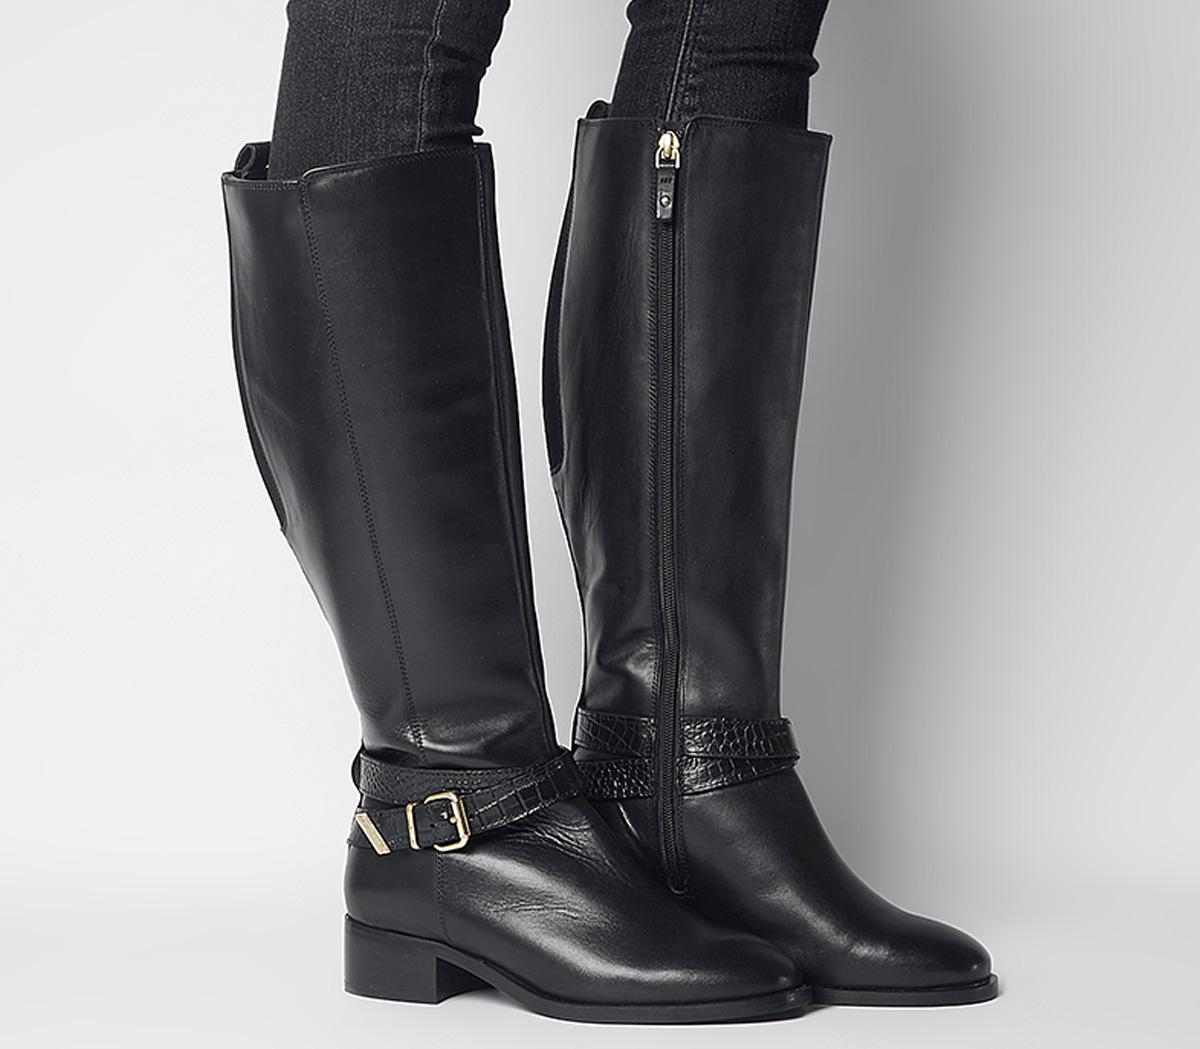 wide fit knee high black boots